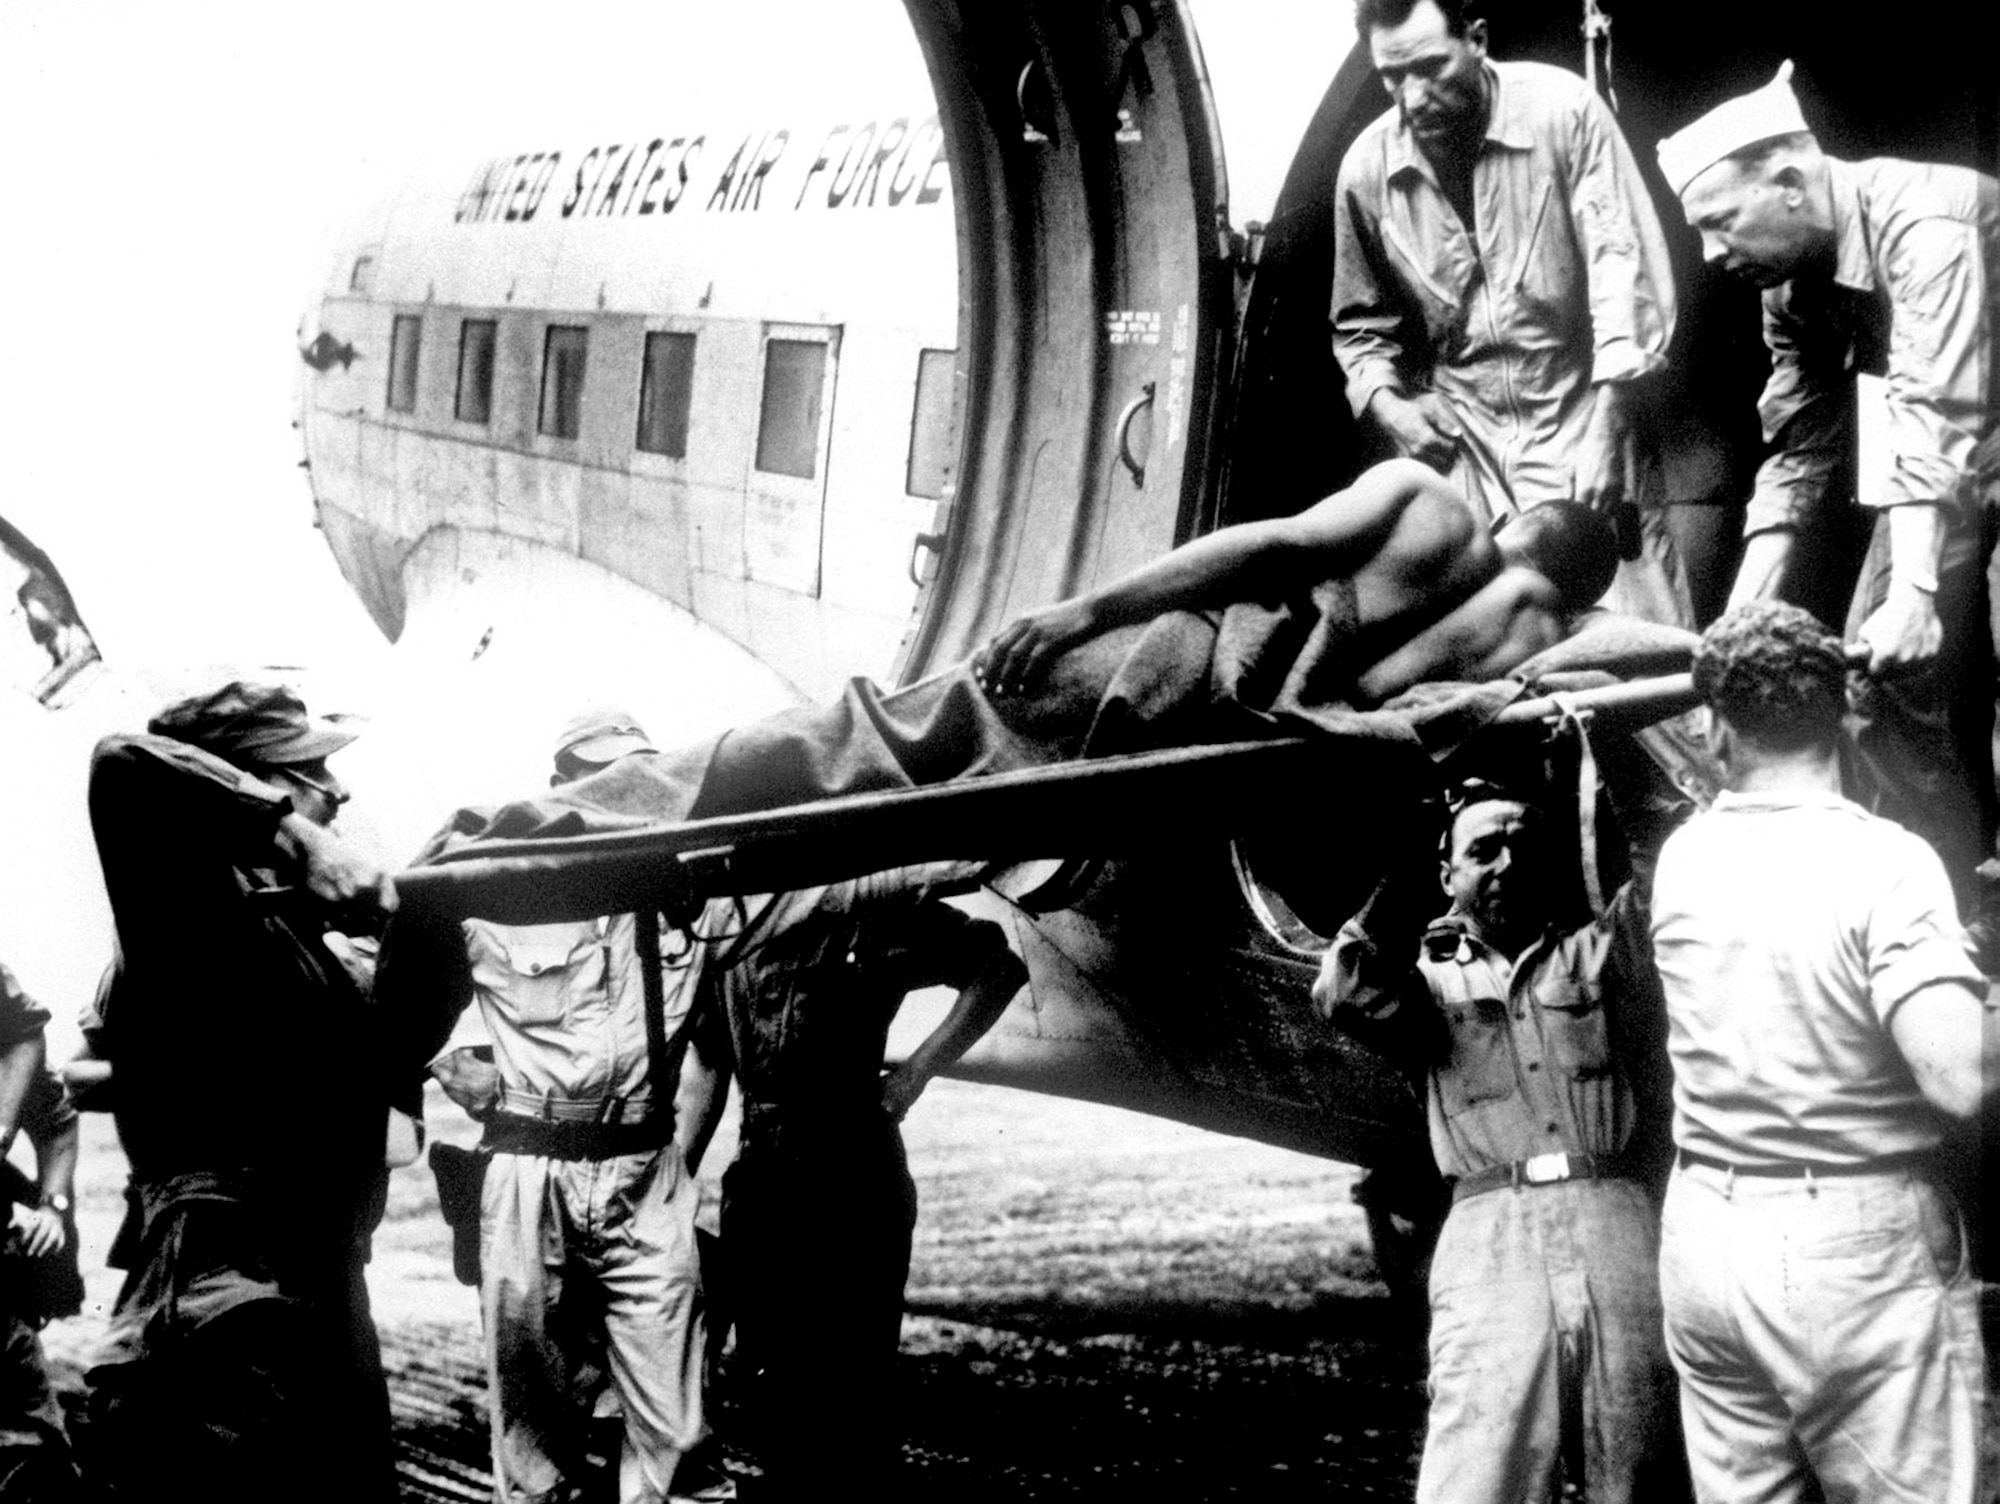 A U.S. casualty of the Korean War arrives in Japan aboard a U.S. Air Force C-47, July 1950. The U.S. Air Force Military Air Transport System took over moving patients. These flights were staffed by trained Air Force AE crews to safely transport casualties. (U.S. Air Force photo)